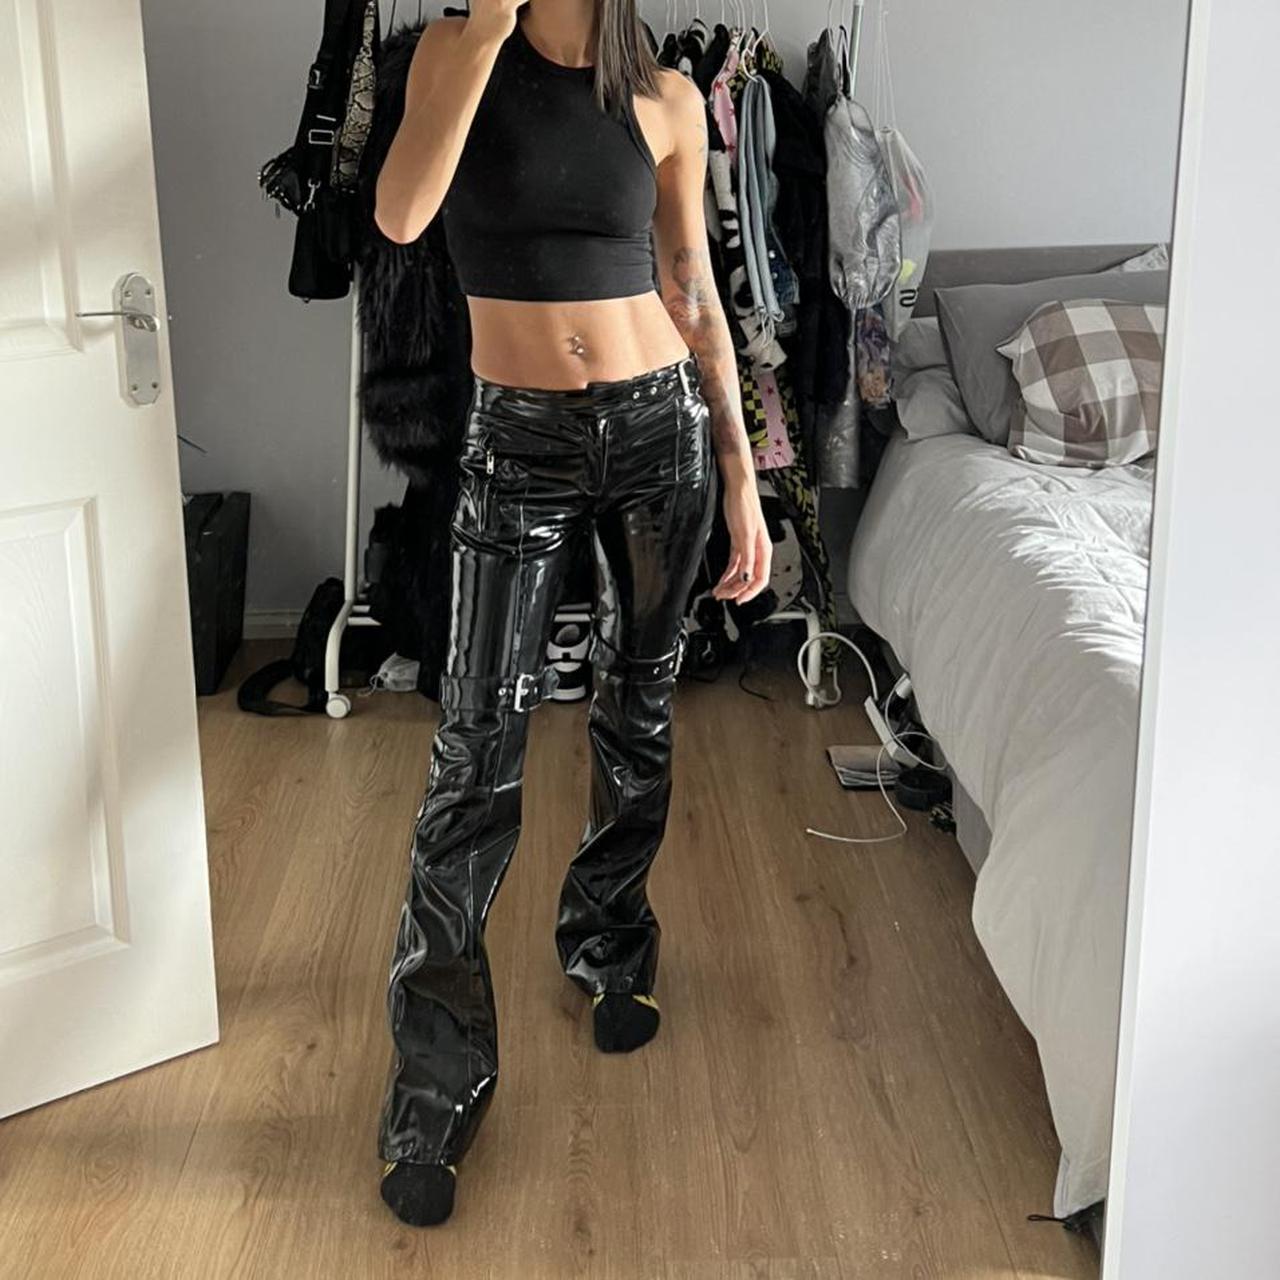 Y2k low waist pvc trousers. New with tags. I’m a... - Depop